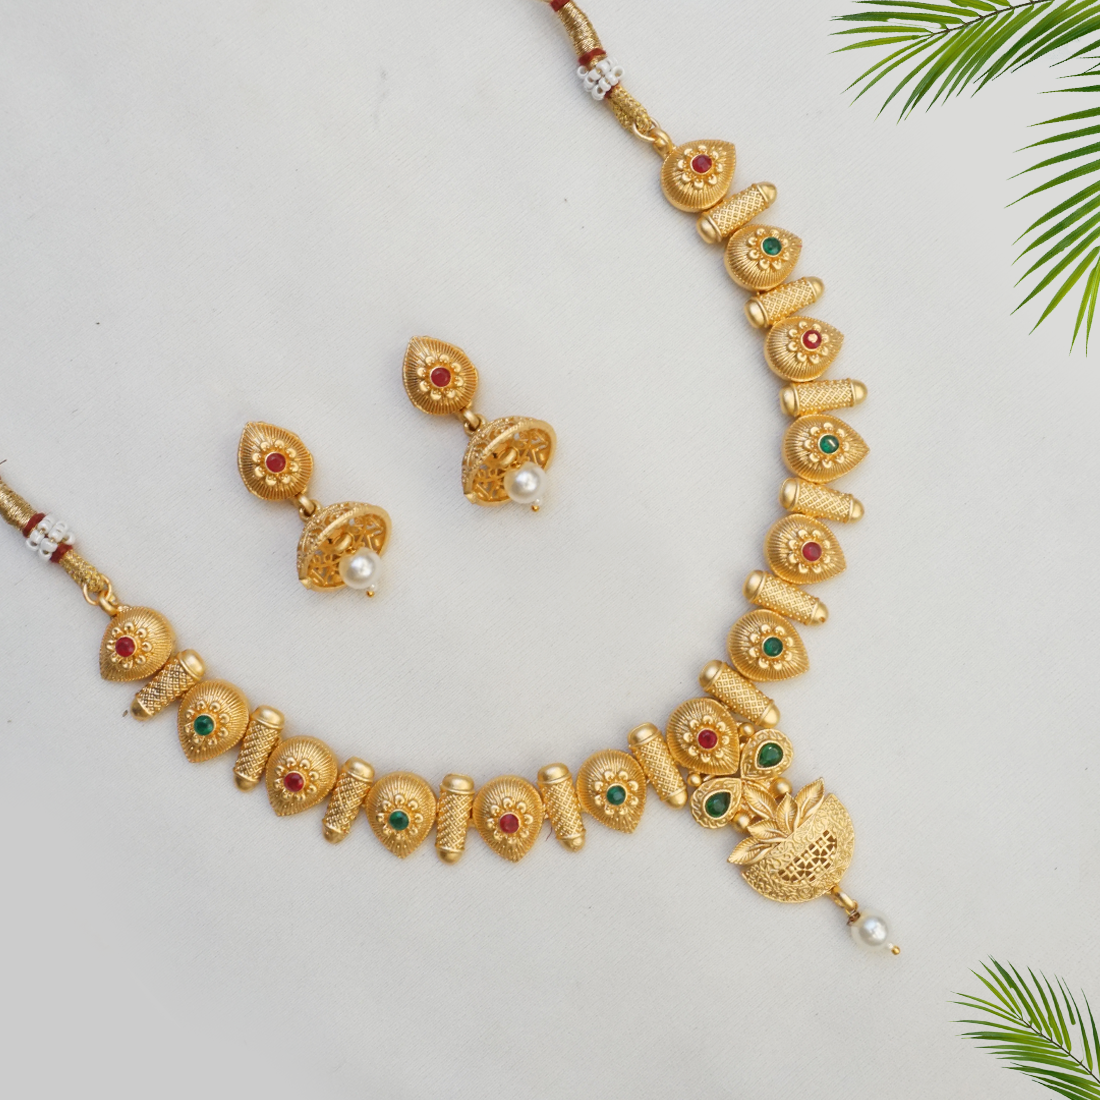 Rajwadi Gold Plated Brass Necklace Set With Jhumka earring